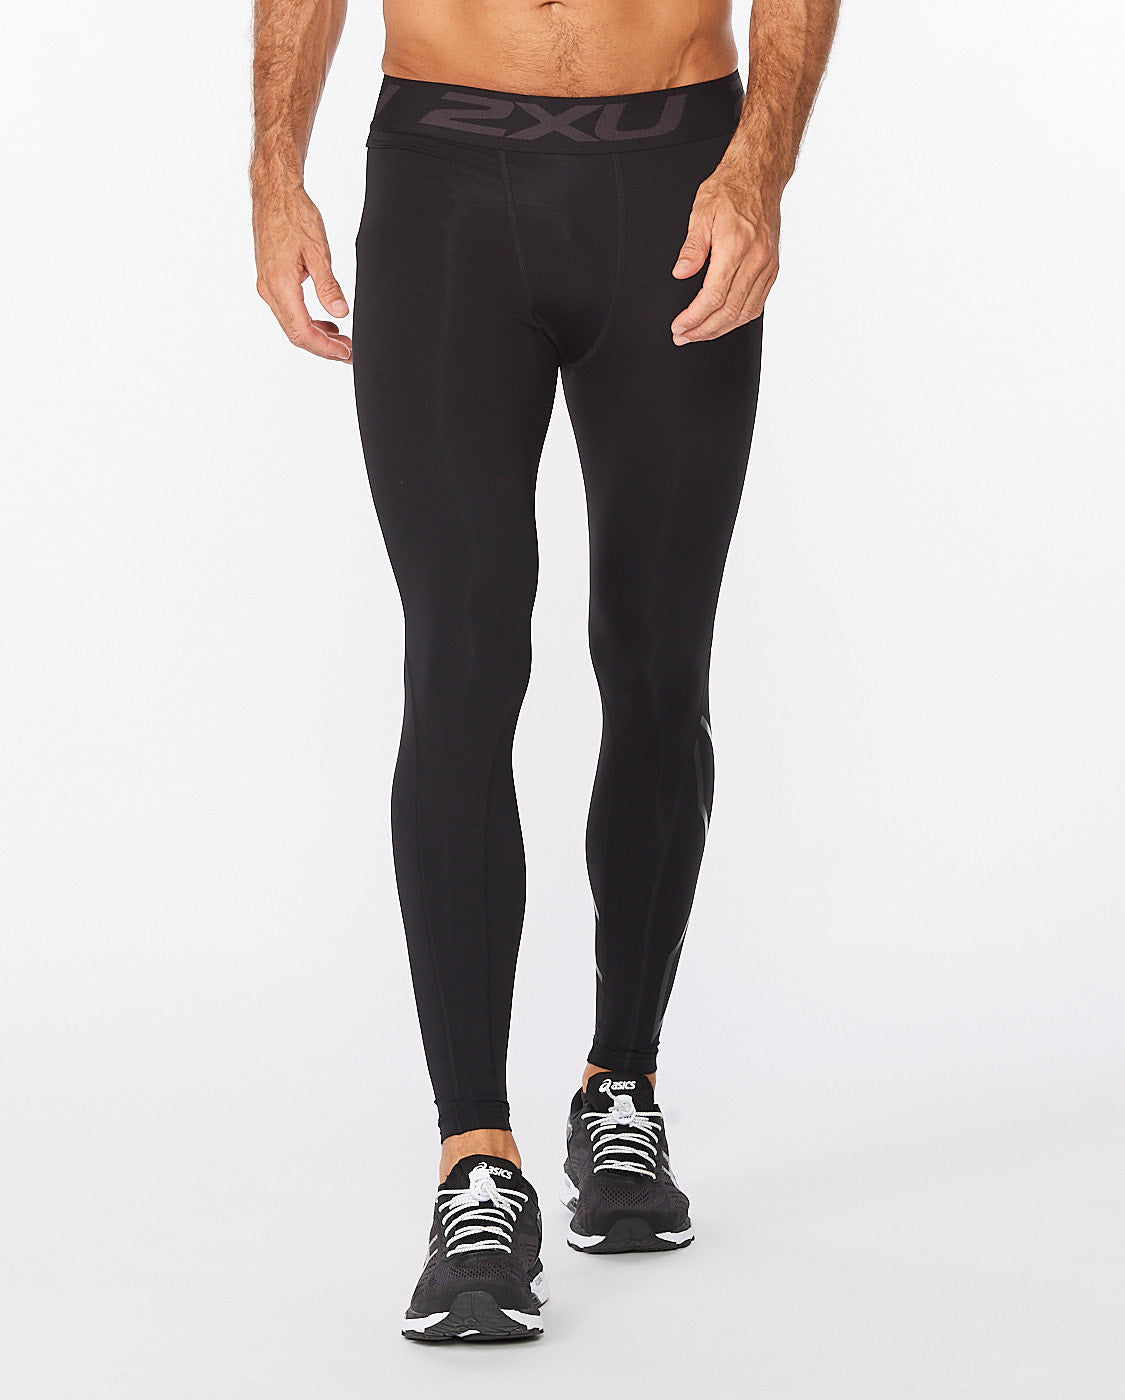 Did you know? 2XU has the most targeted compression technology on